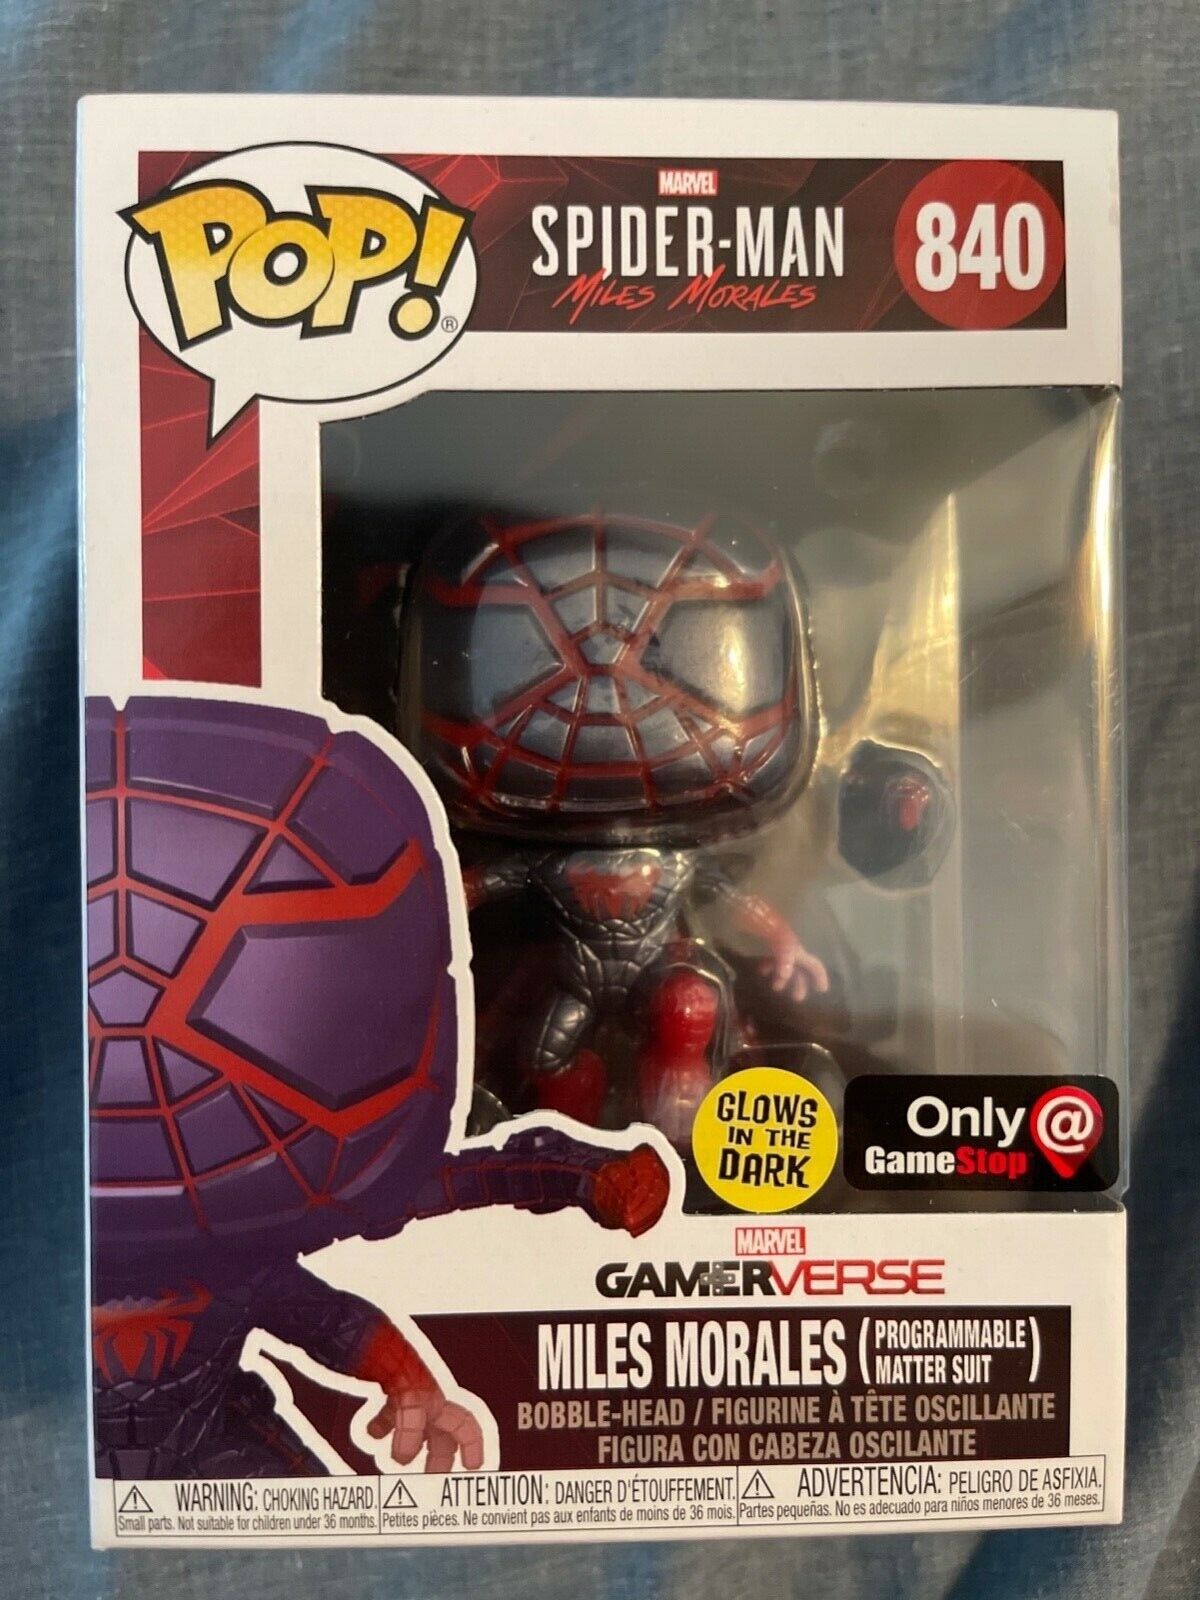 Miles Morales Funko pop with programmable matter suit. Glow in the dark bobble.